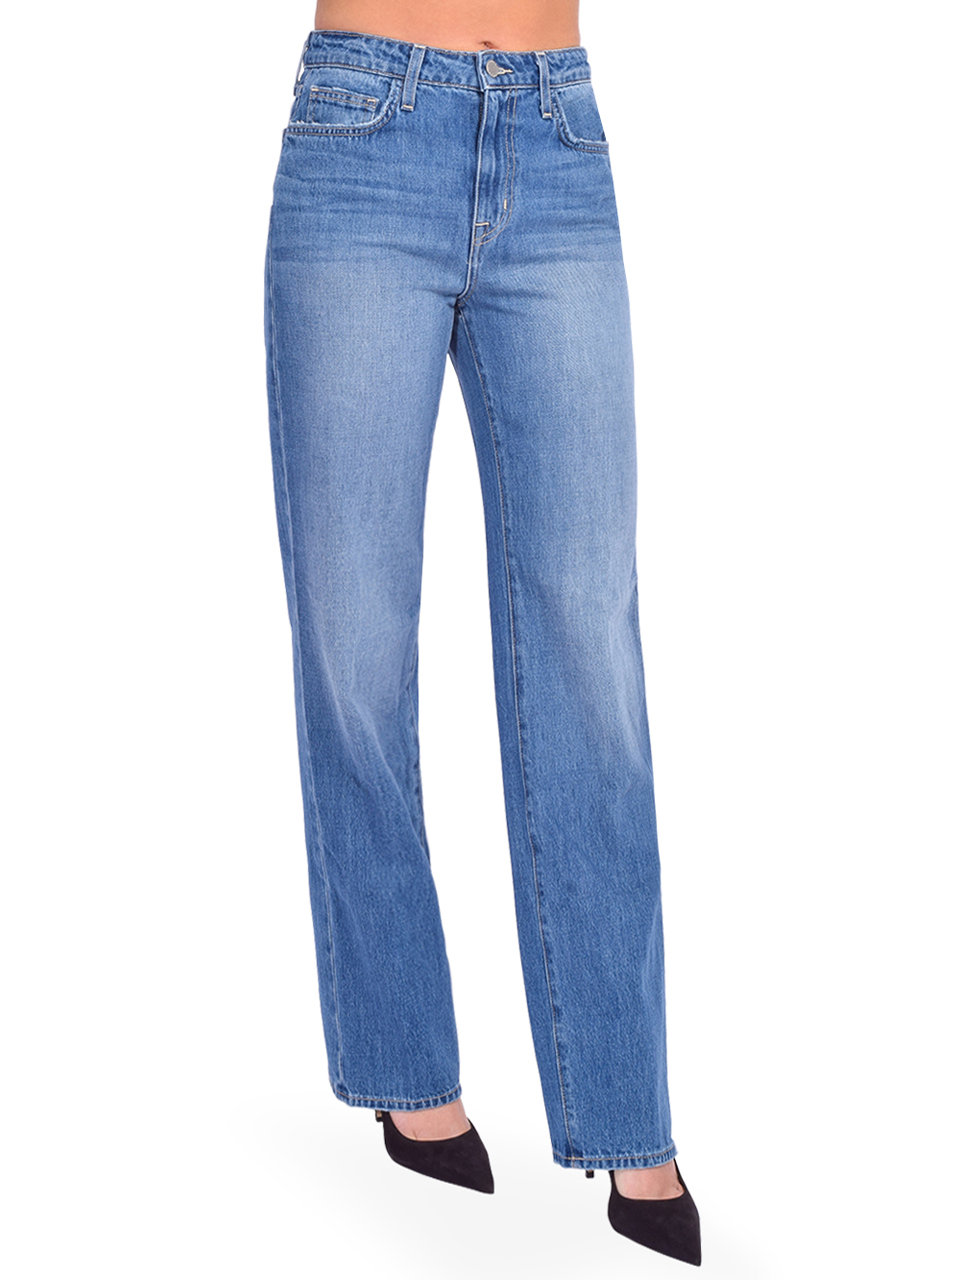 L'AGENCE Jones Ultra High Rise Stovepipe Jean in Boyle Side View 